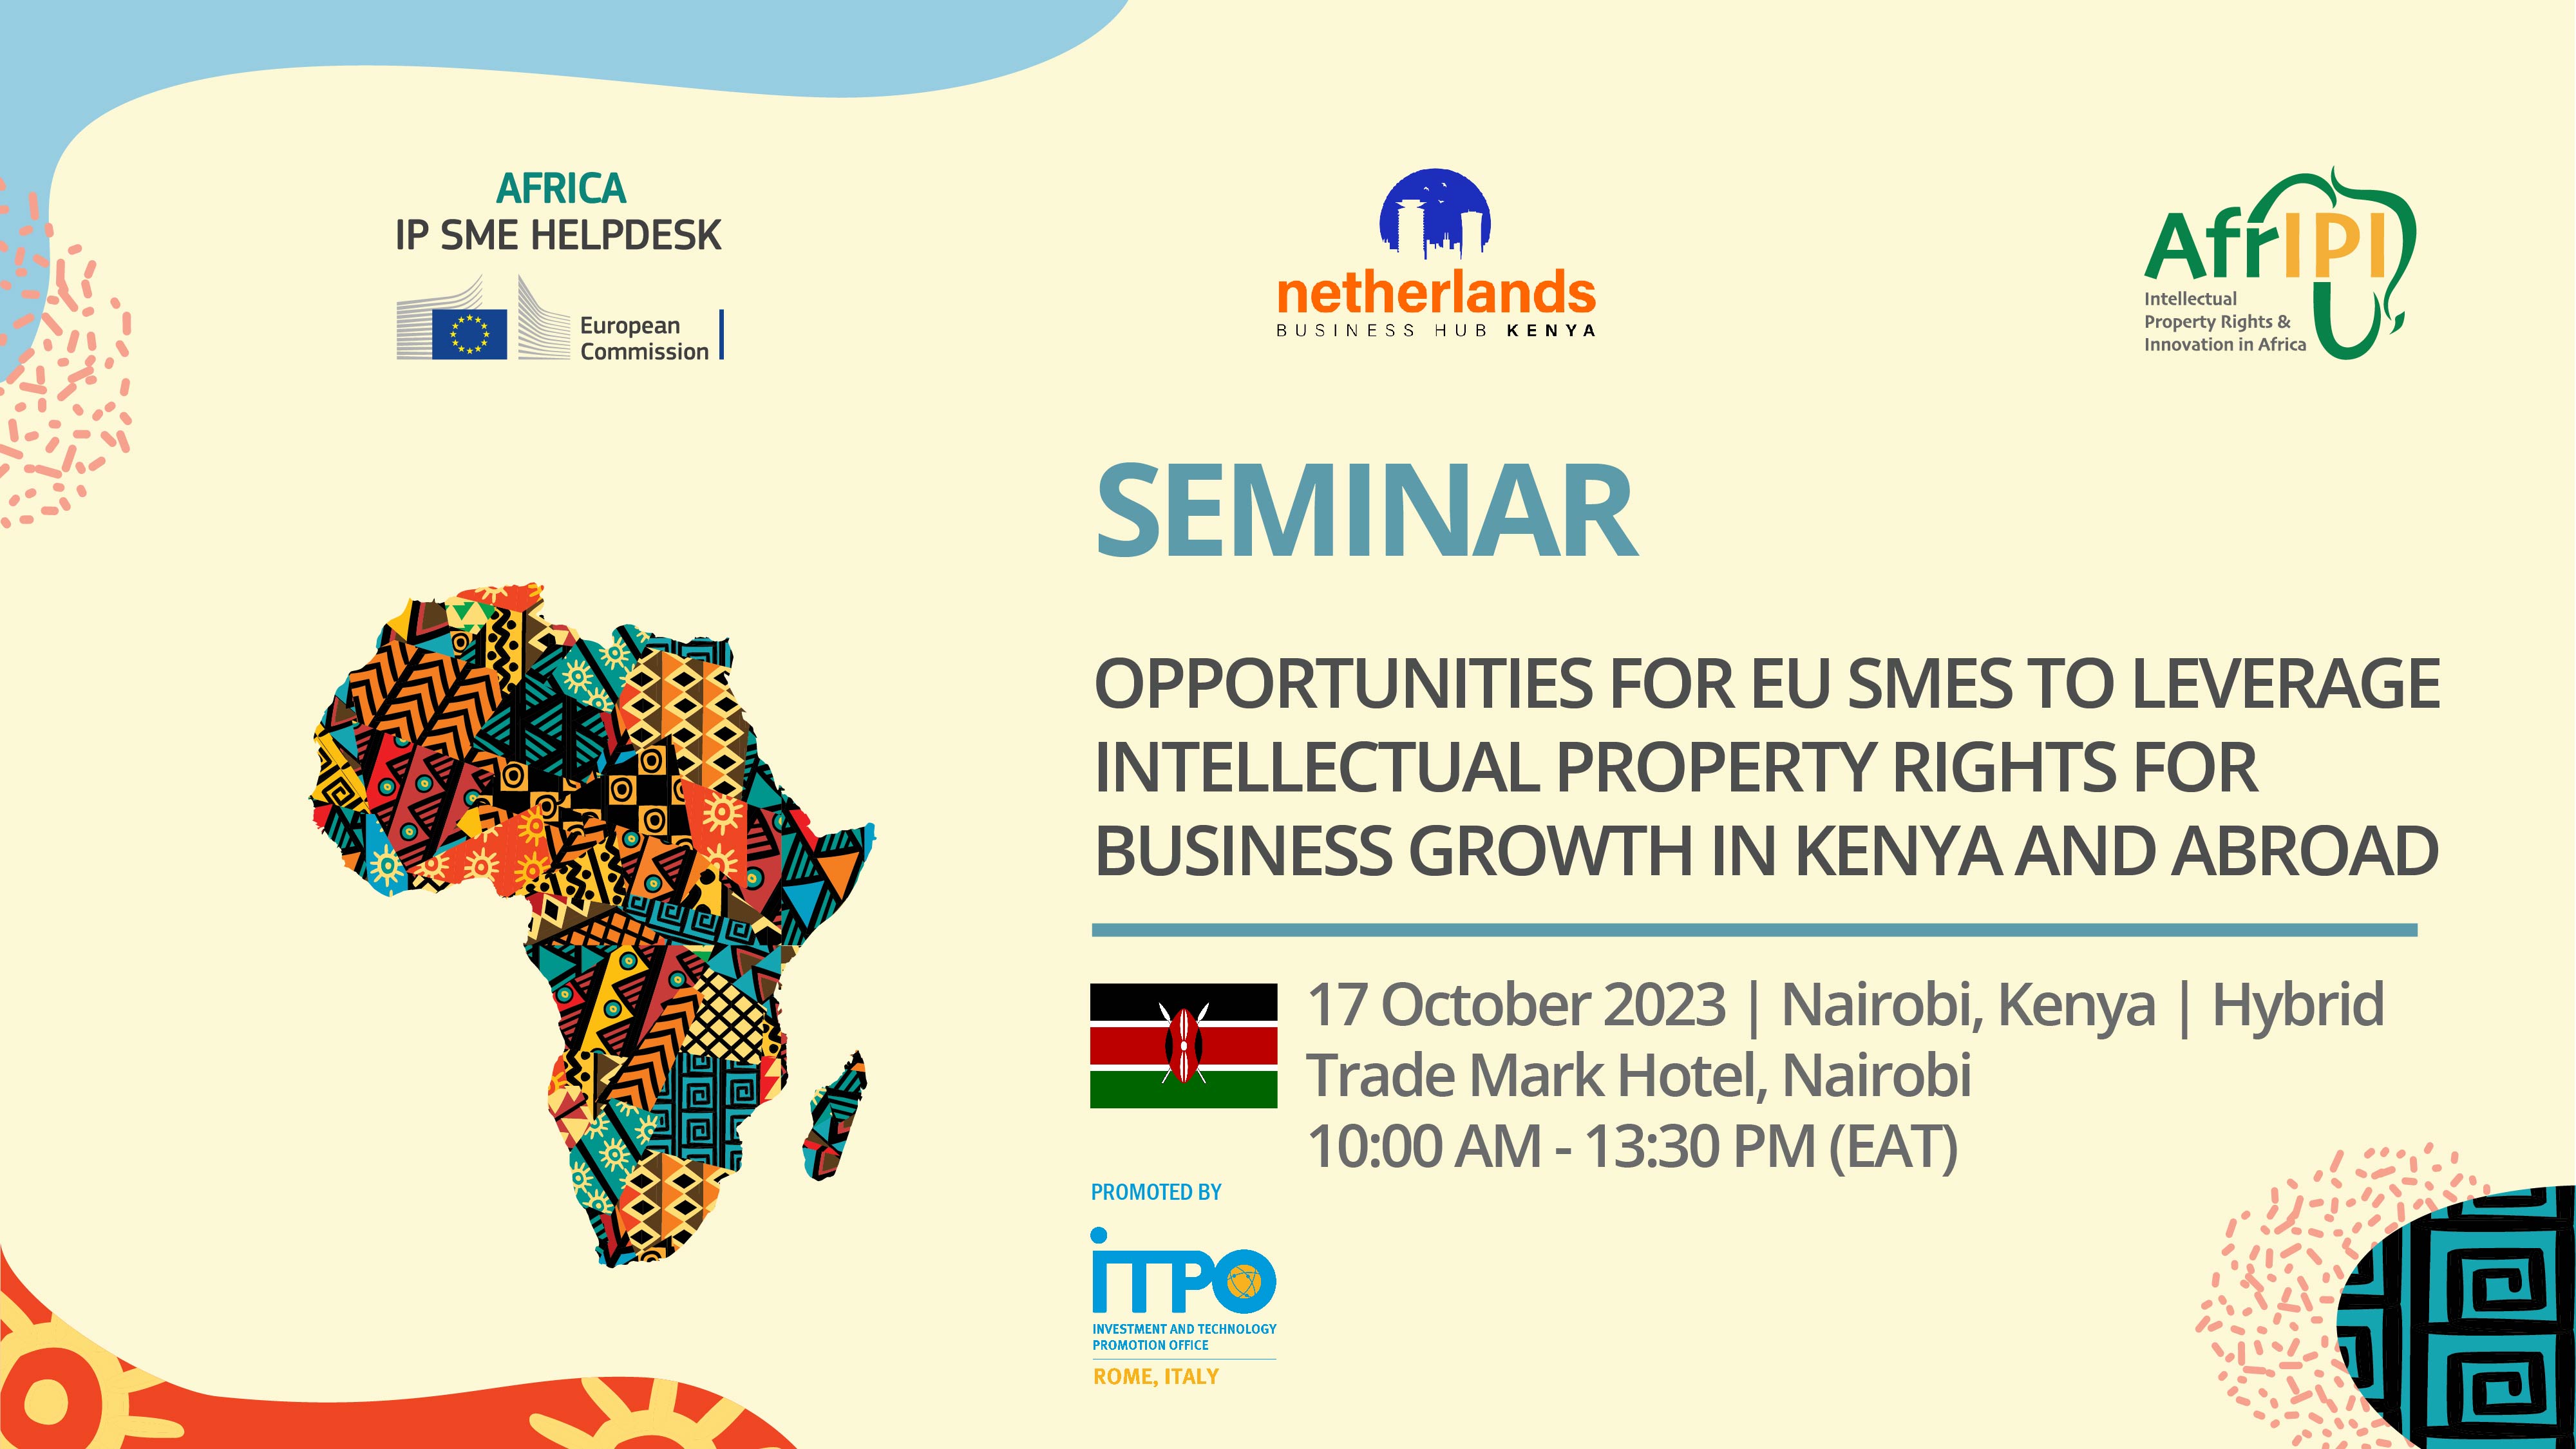 Seminar on opportunities for EU SMEs to leverage intellectual property rights for business growth in Kenya and abroad